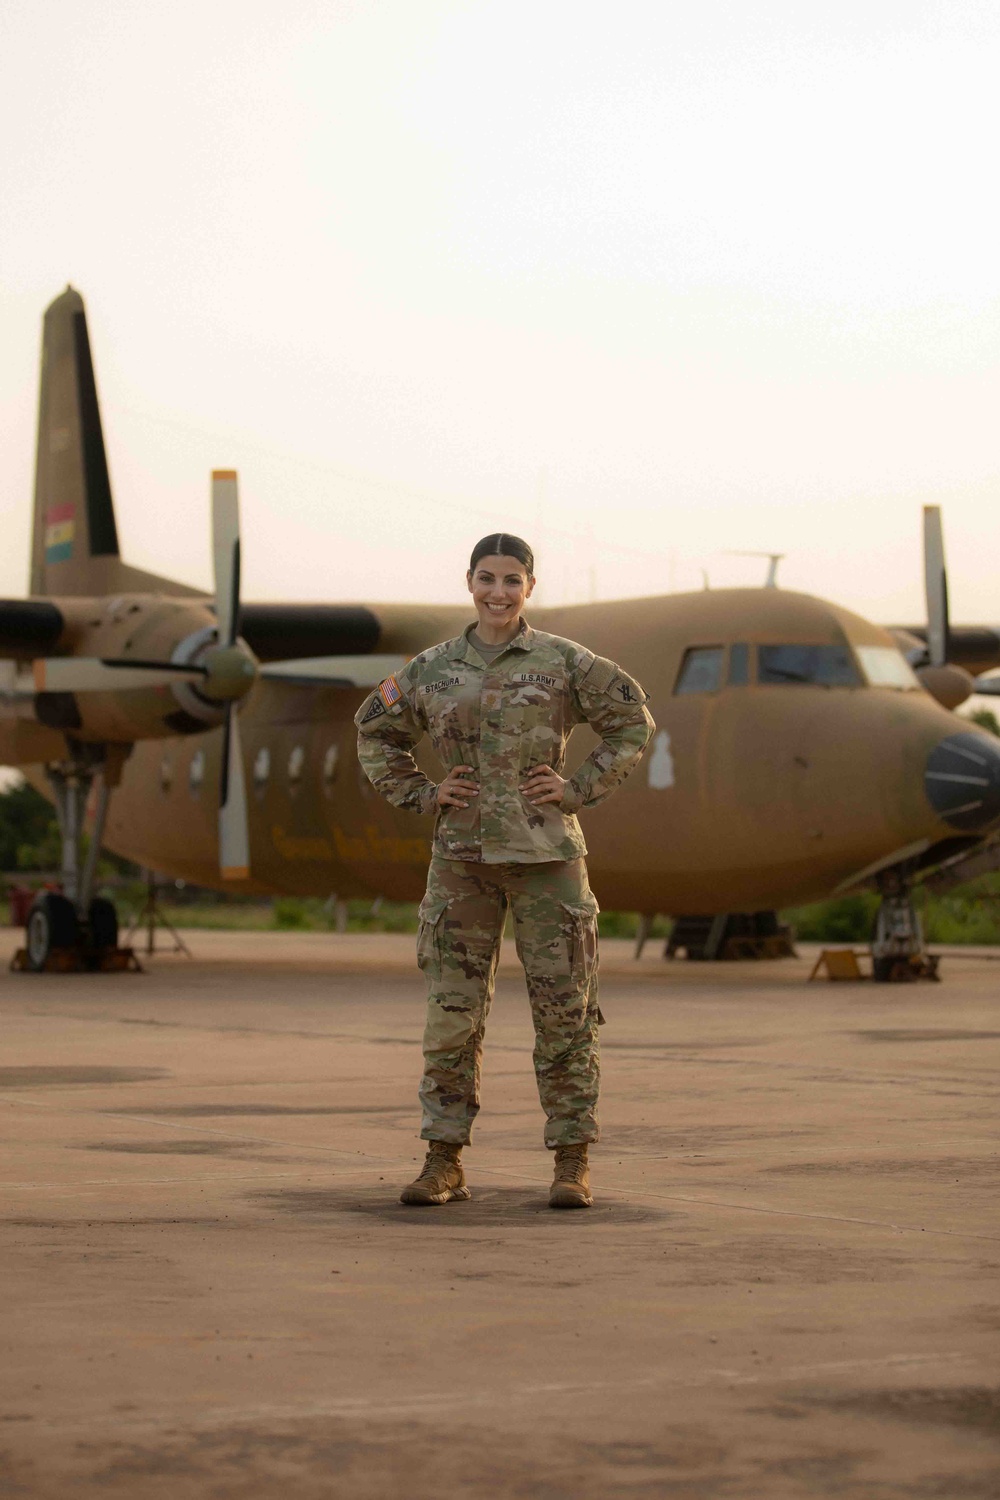 Generations of Service: Maj. Stachura's Journey in the U.S. Army